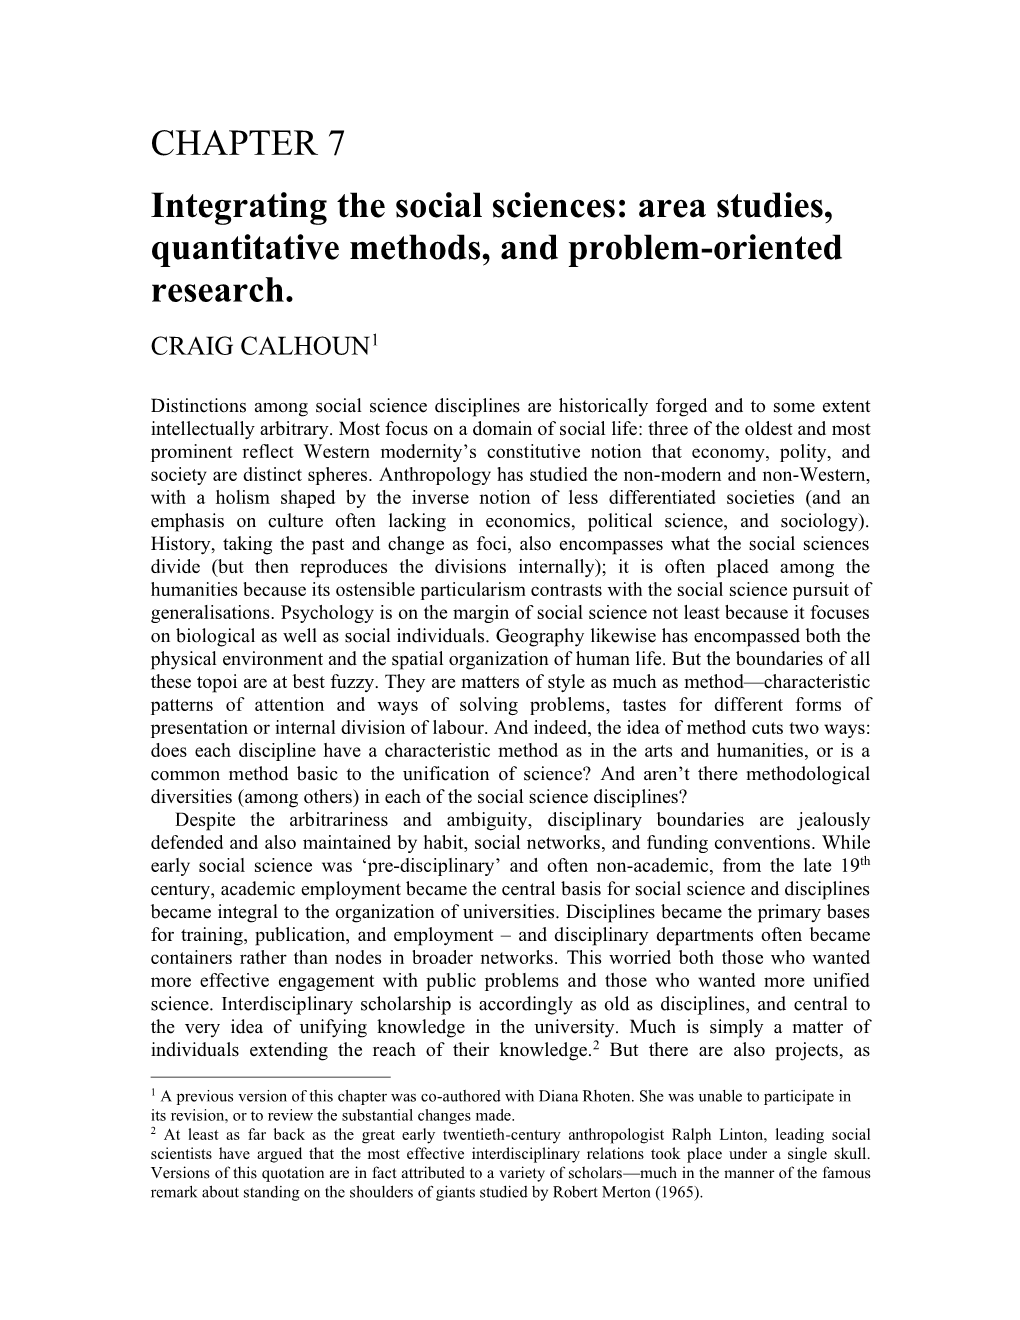 CHAPTER 7 Integrating the Social Sciences: Area Studies, Quantitative Methods, and Problem-Oriented Research